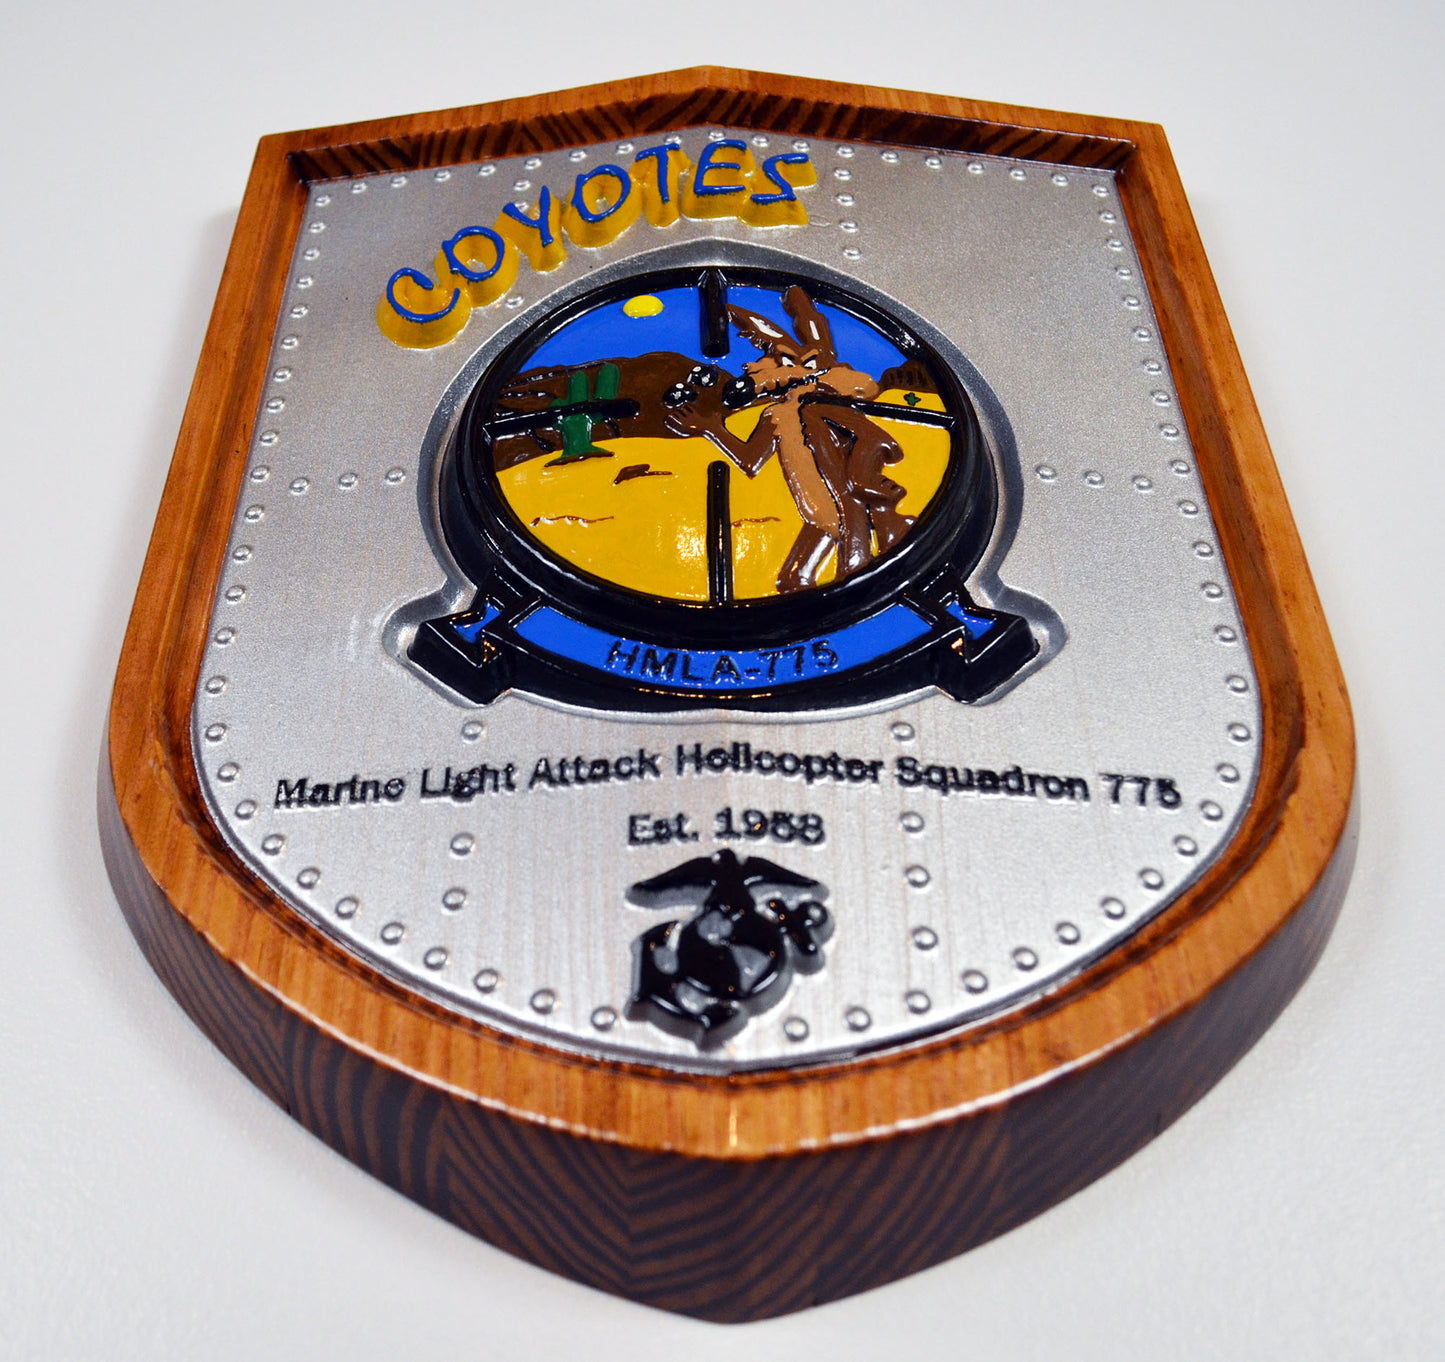 USMC Light Attack Helicopter Squadron, Coyotes, HMLA-775, CNC 3d wood carving, painted military plaque